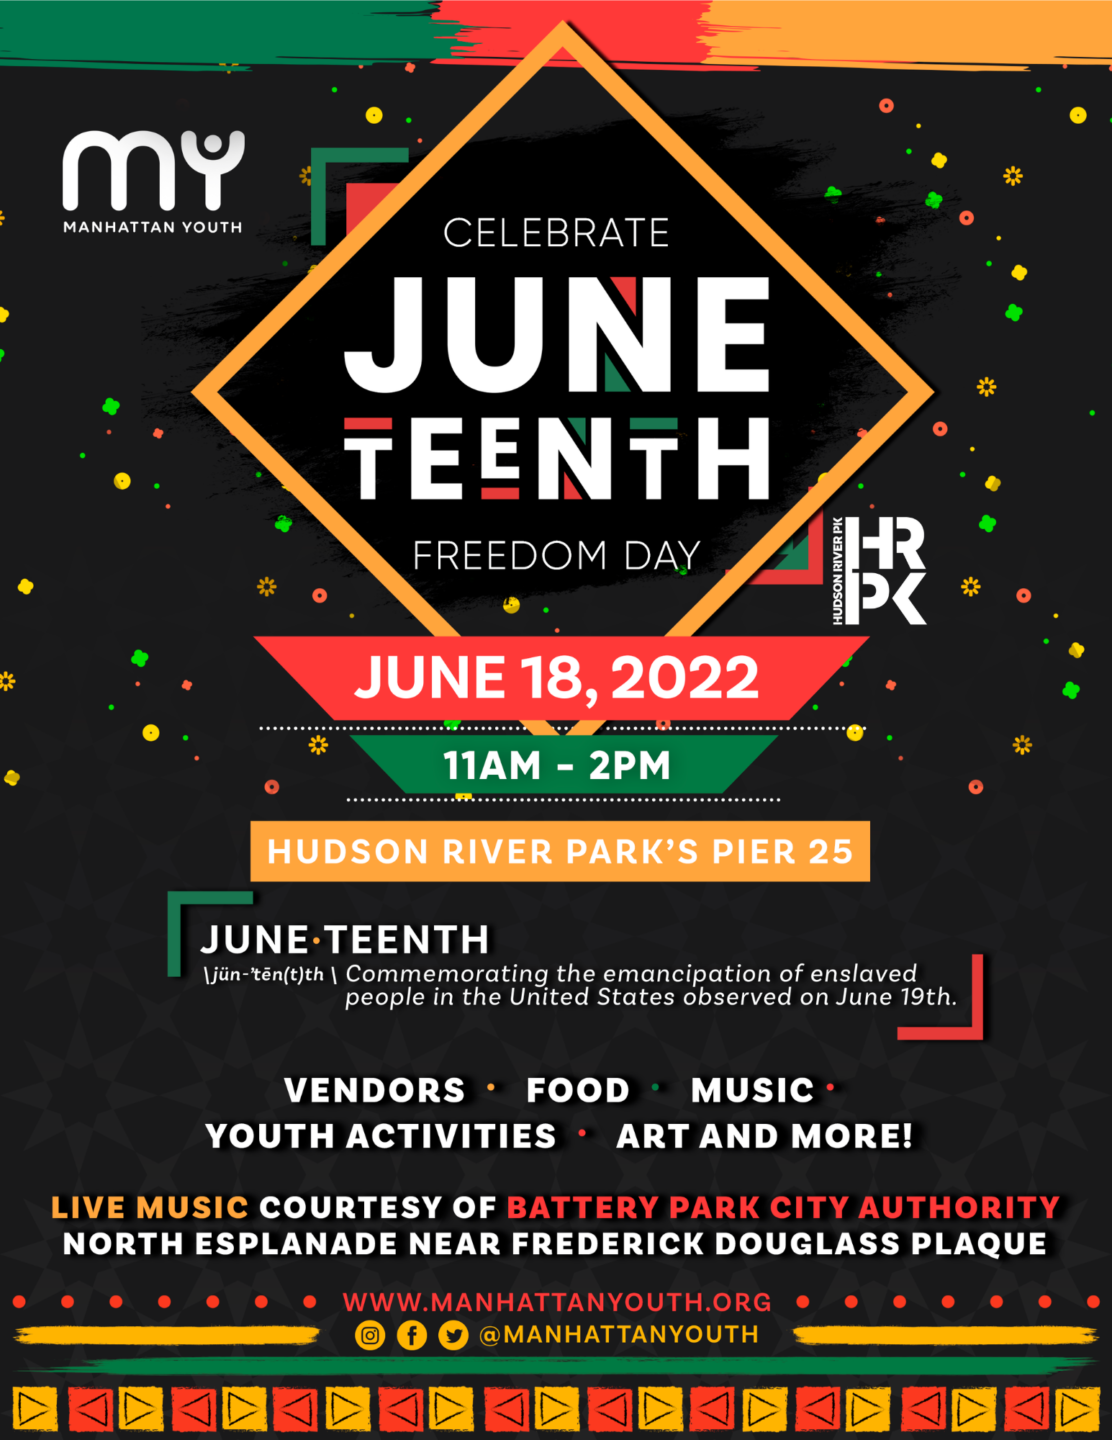 Flyer with event details on a black background with bright colors. Celebrate Juneteenth on June 18, from 11 AM - 2 PM at Hudson River Park's Pier 25 with food, music, youth activities, vendors and more.